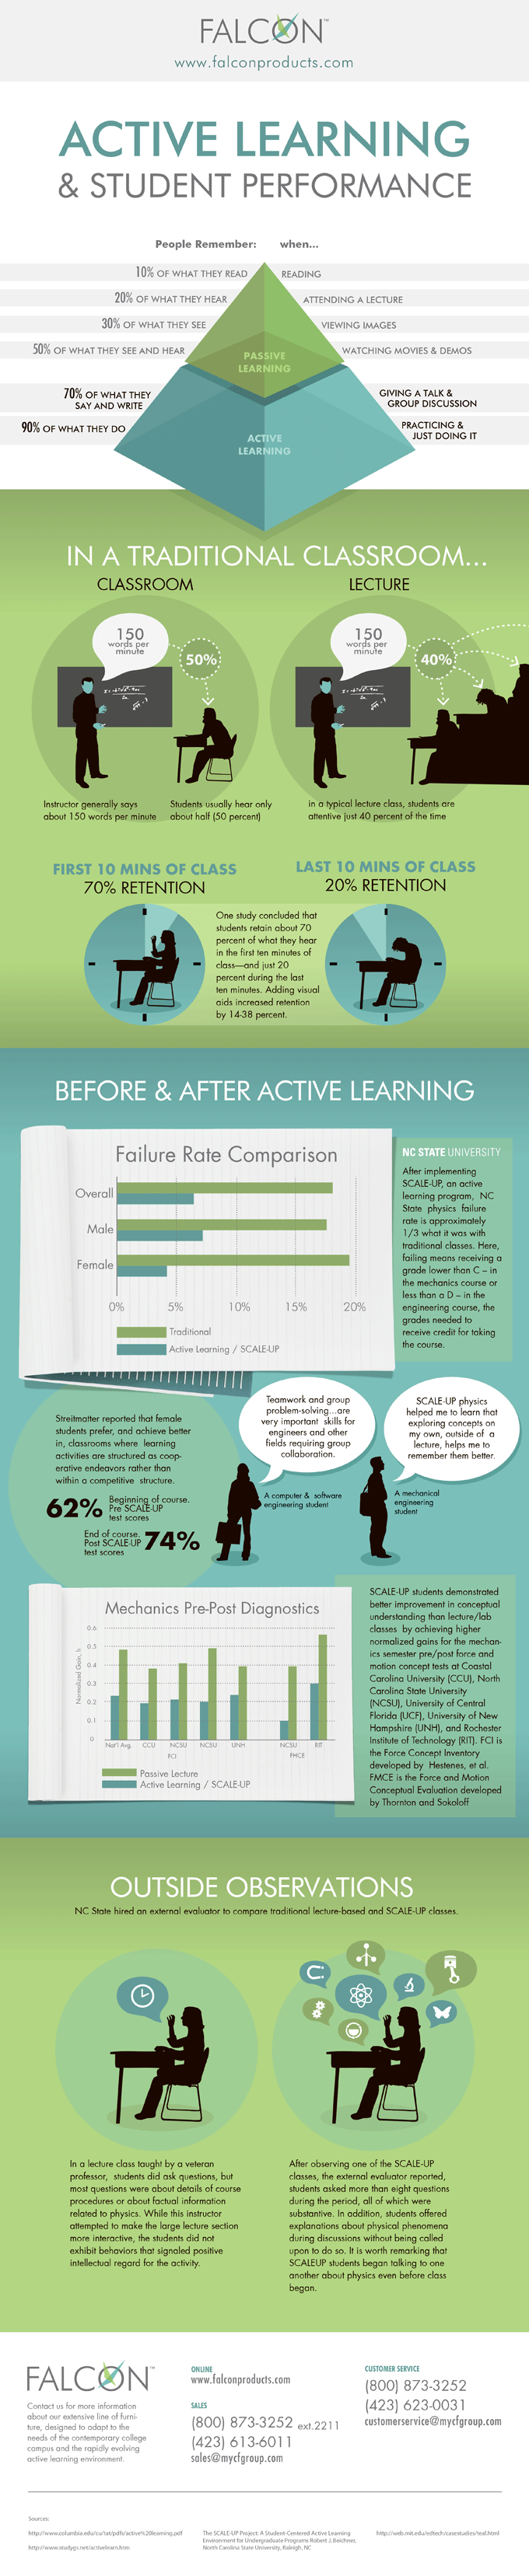 Active Learning and Student Performance Infographic